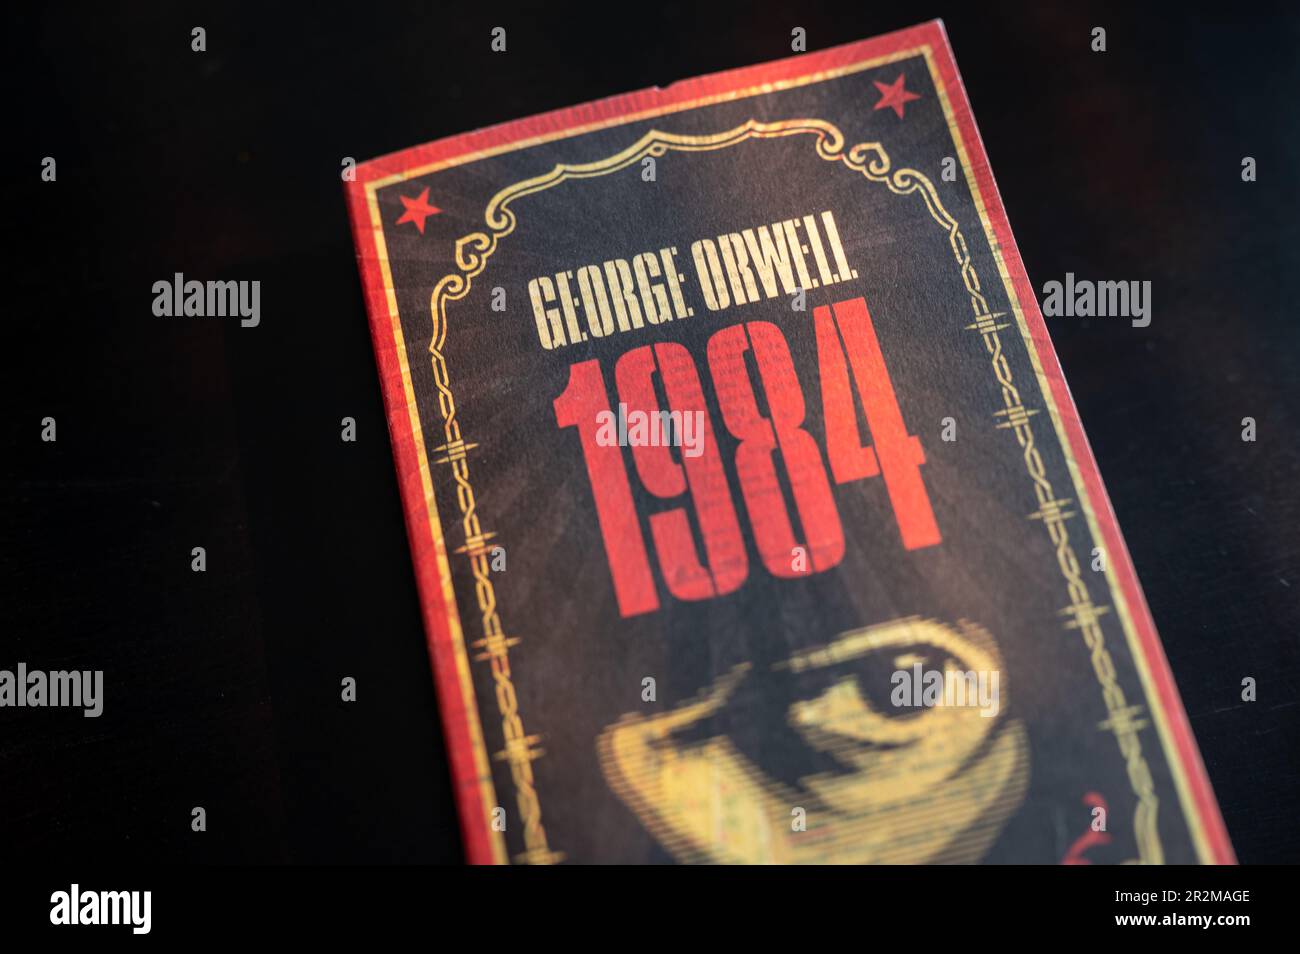 1984 george orwell book hi-res stock photography and images - Alamy